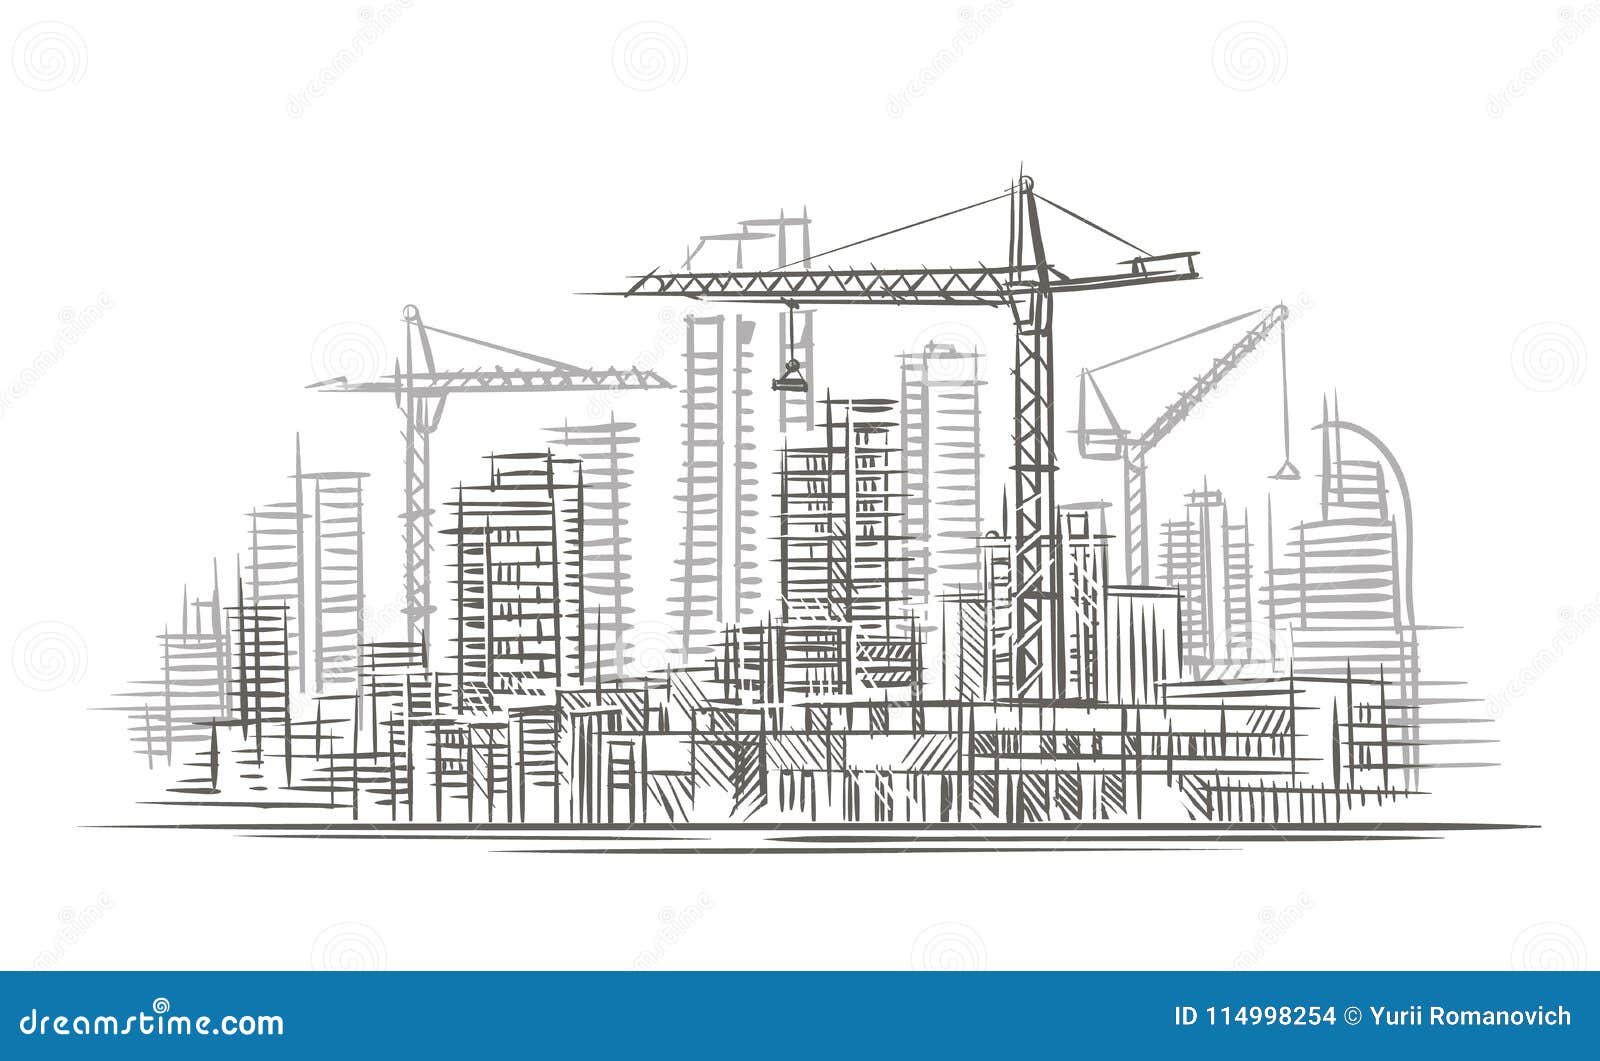 Construction Site Drawing Images  Free Download on Freepik